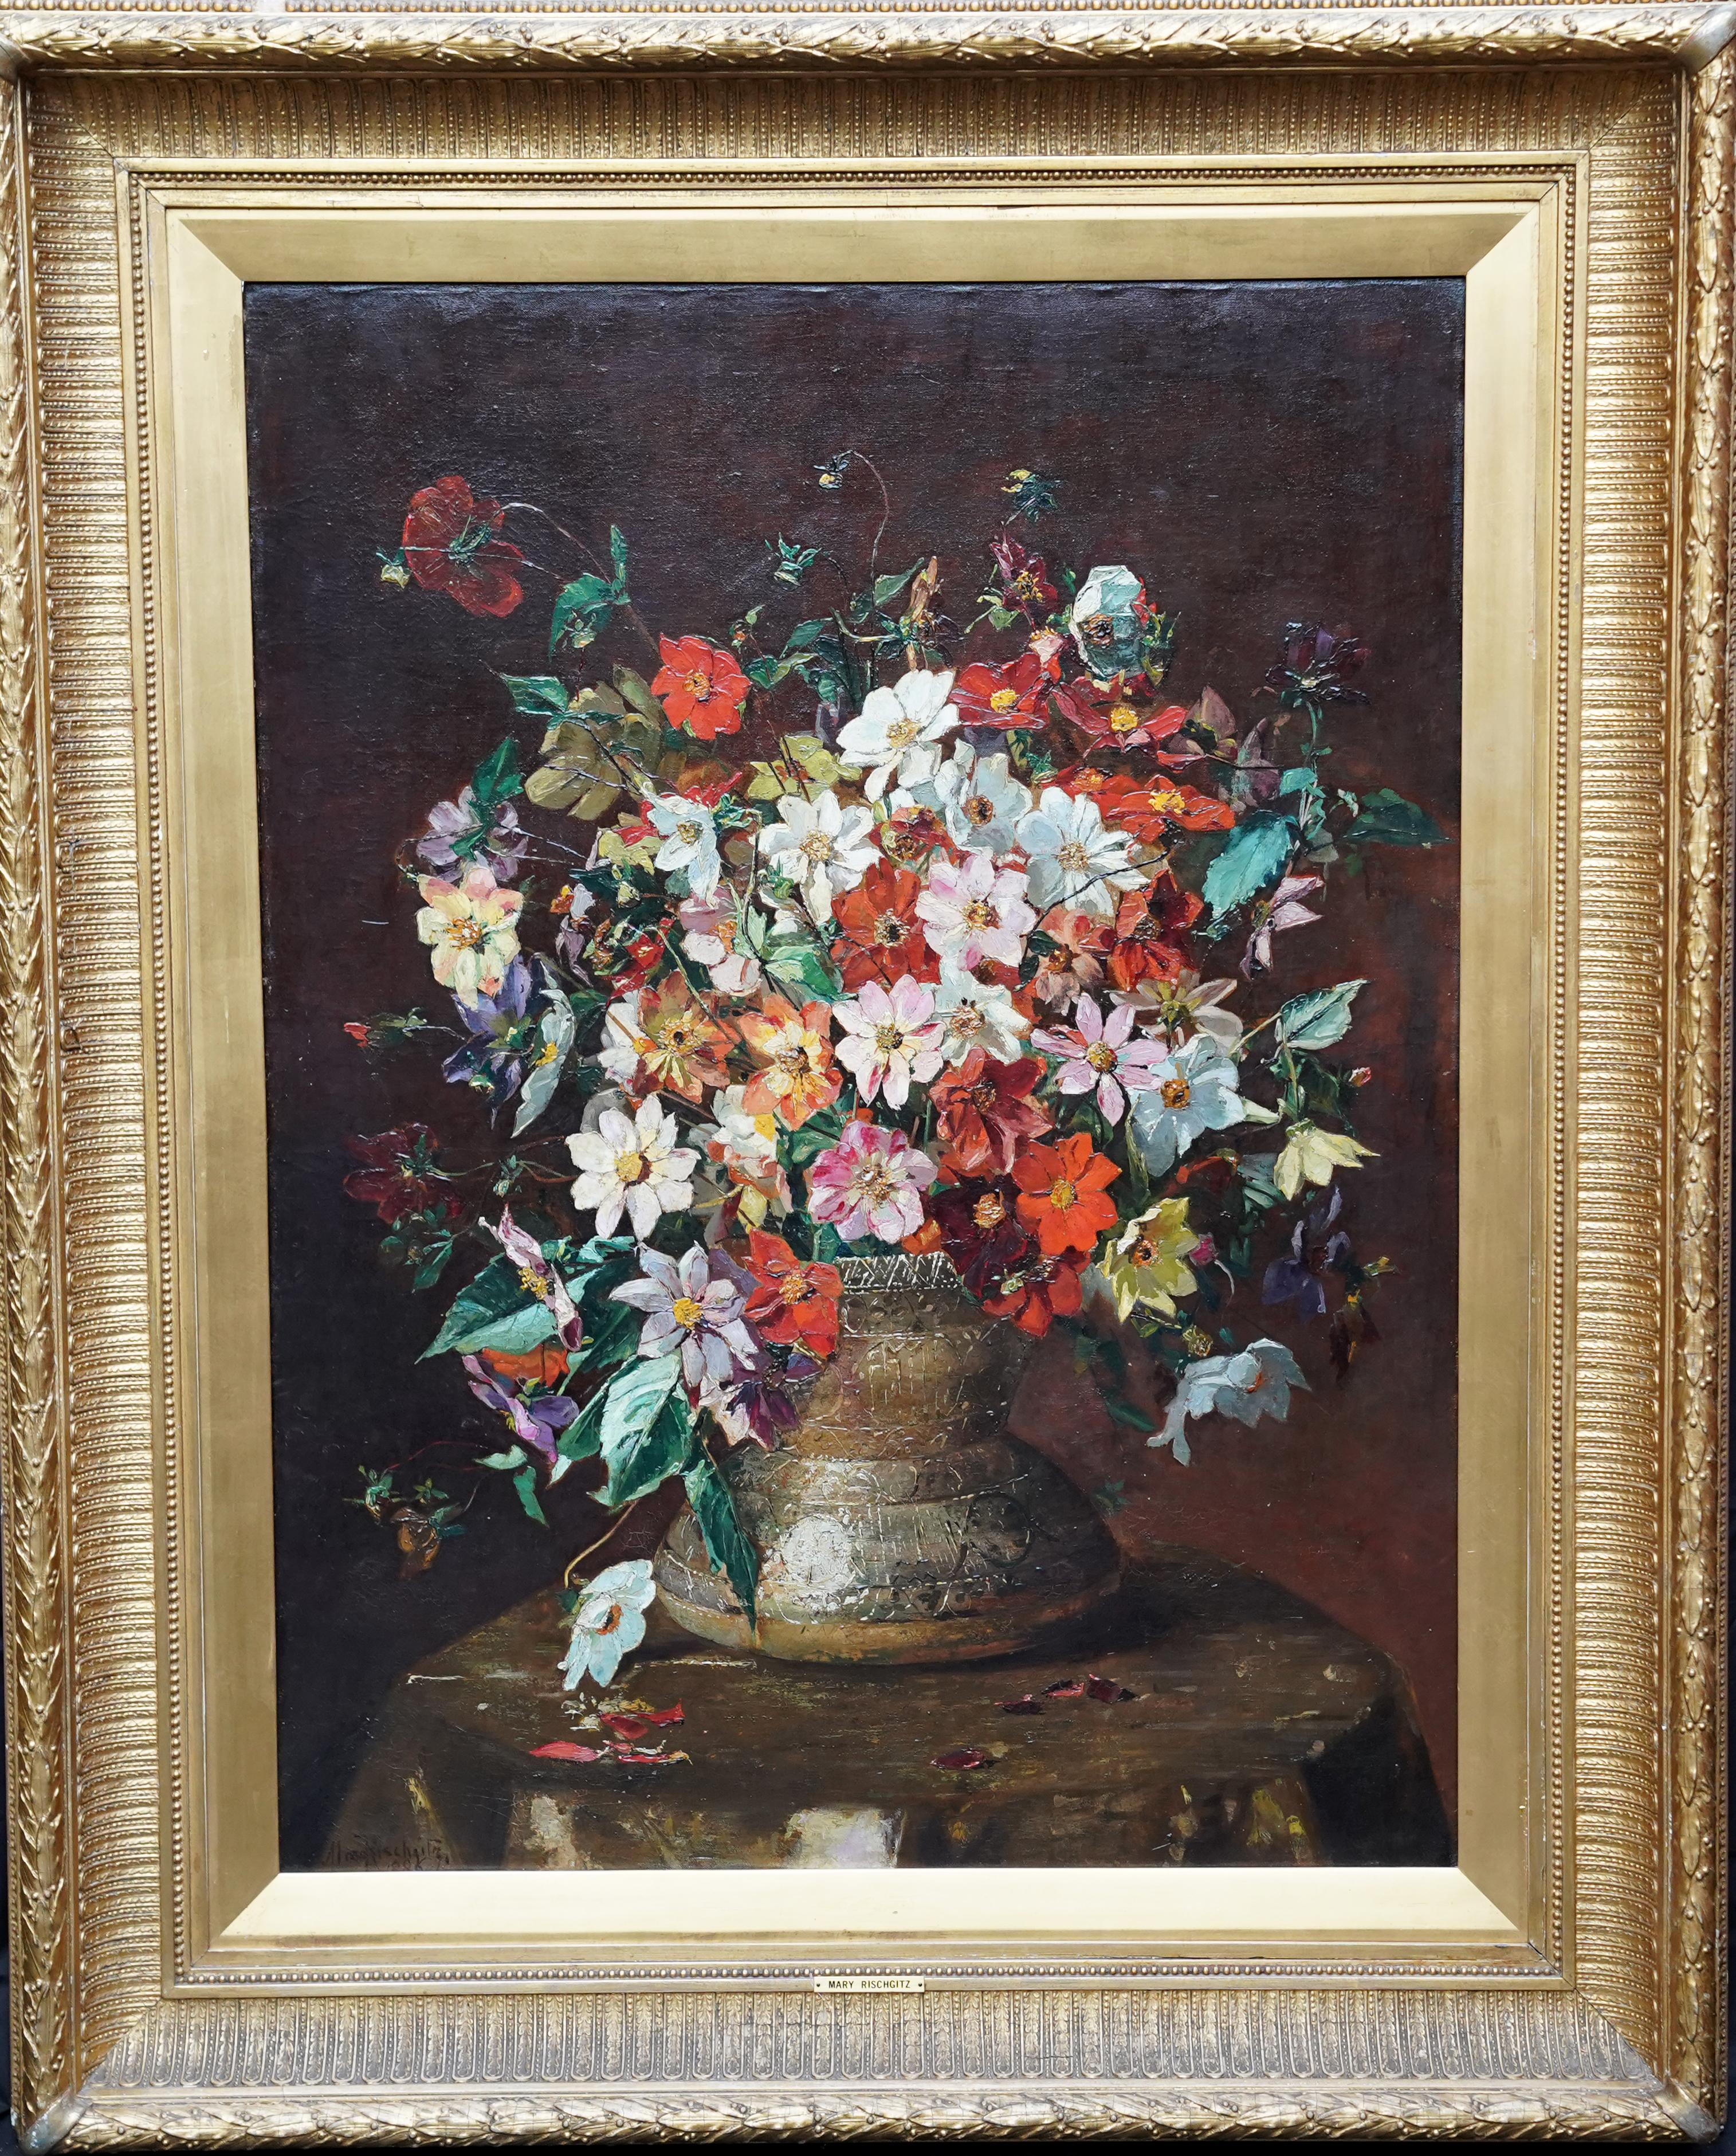 What is Dutch flower painting?